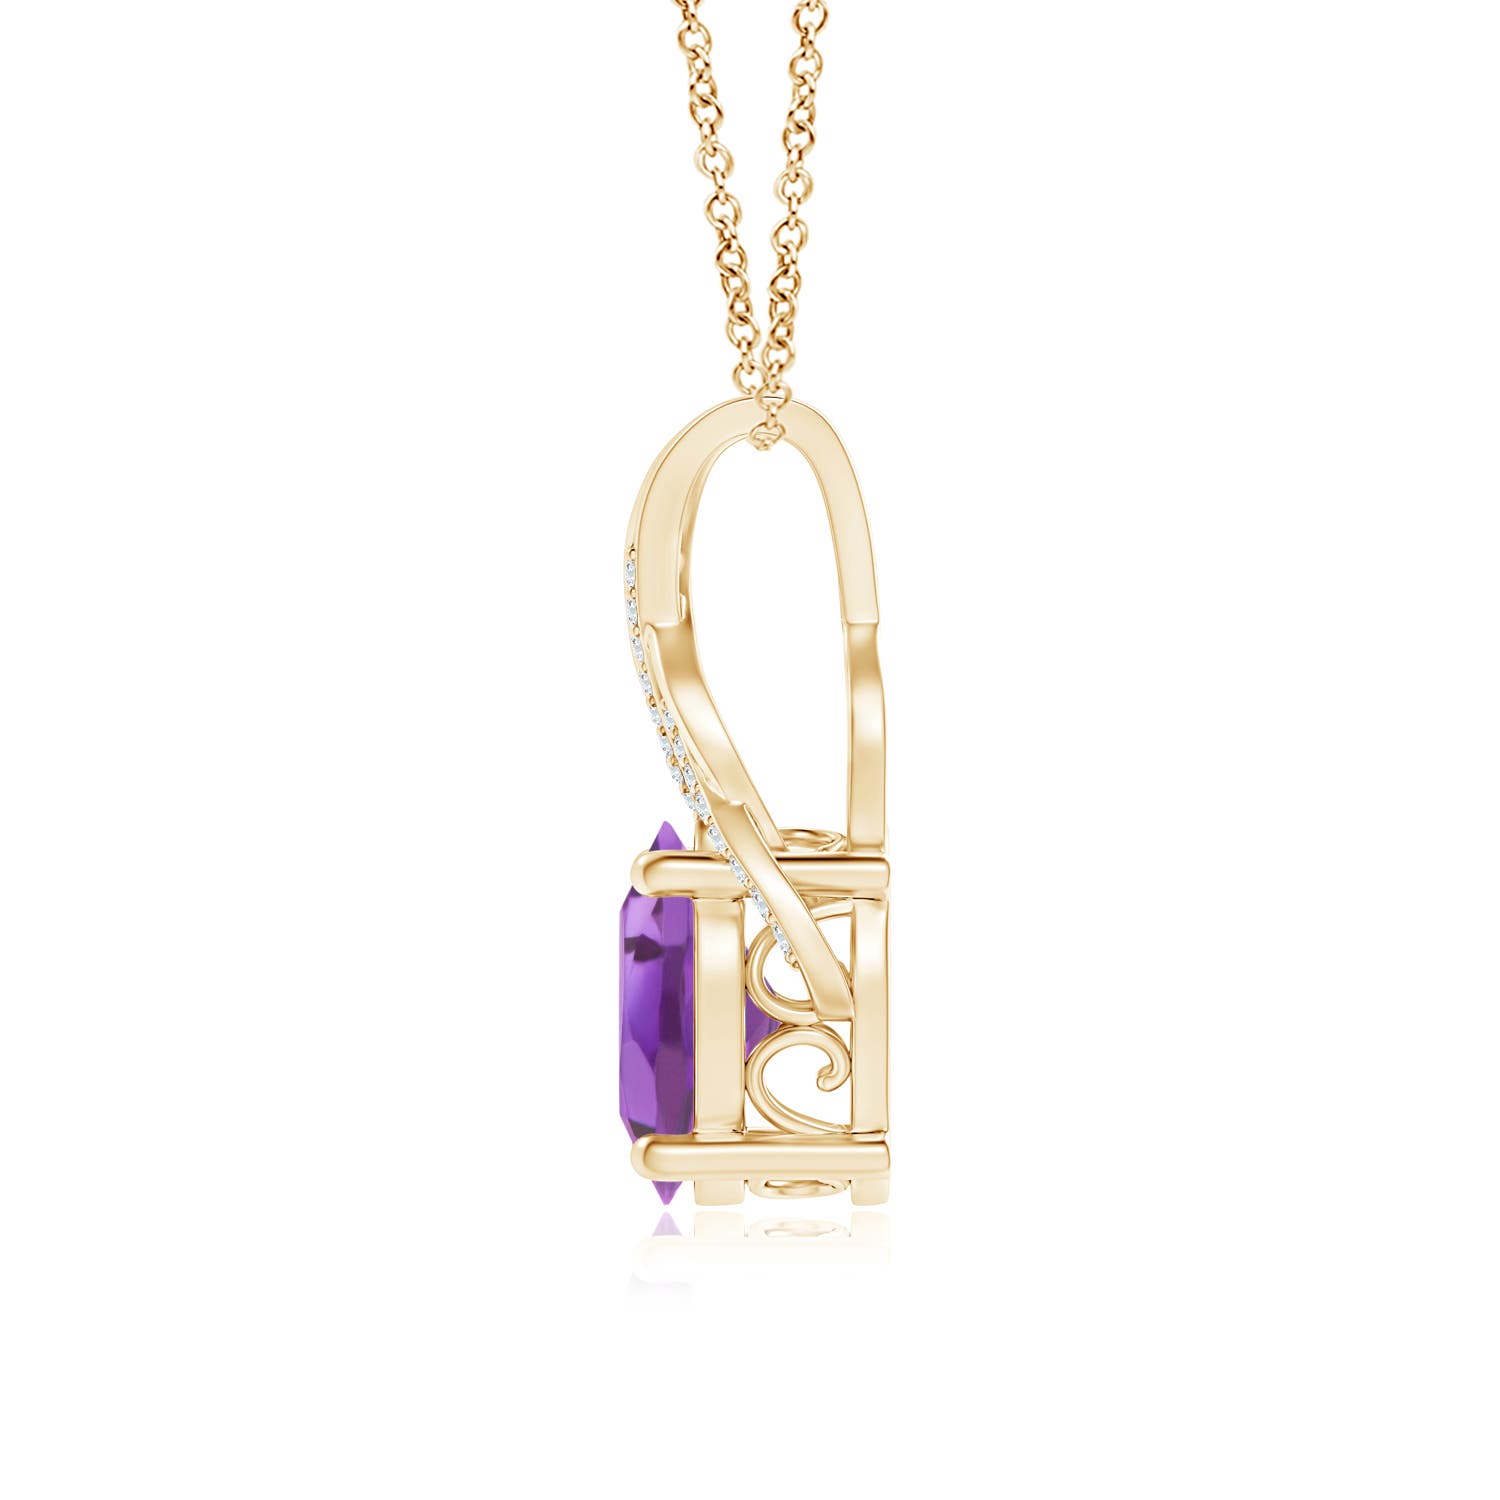 A - Amethyst / 4.43 CT / 14 KT Yellow Gold